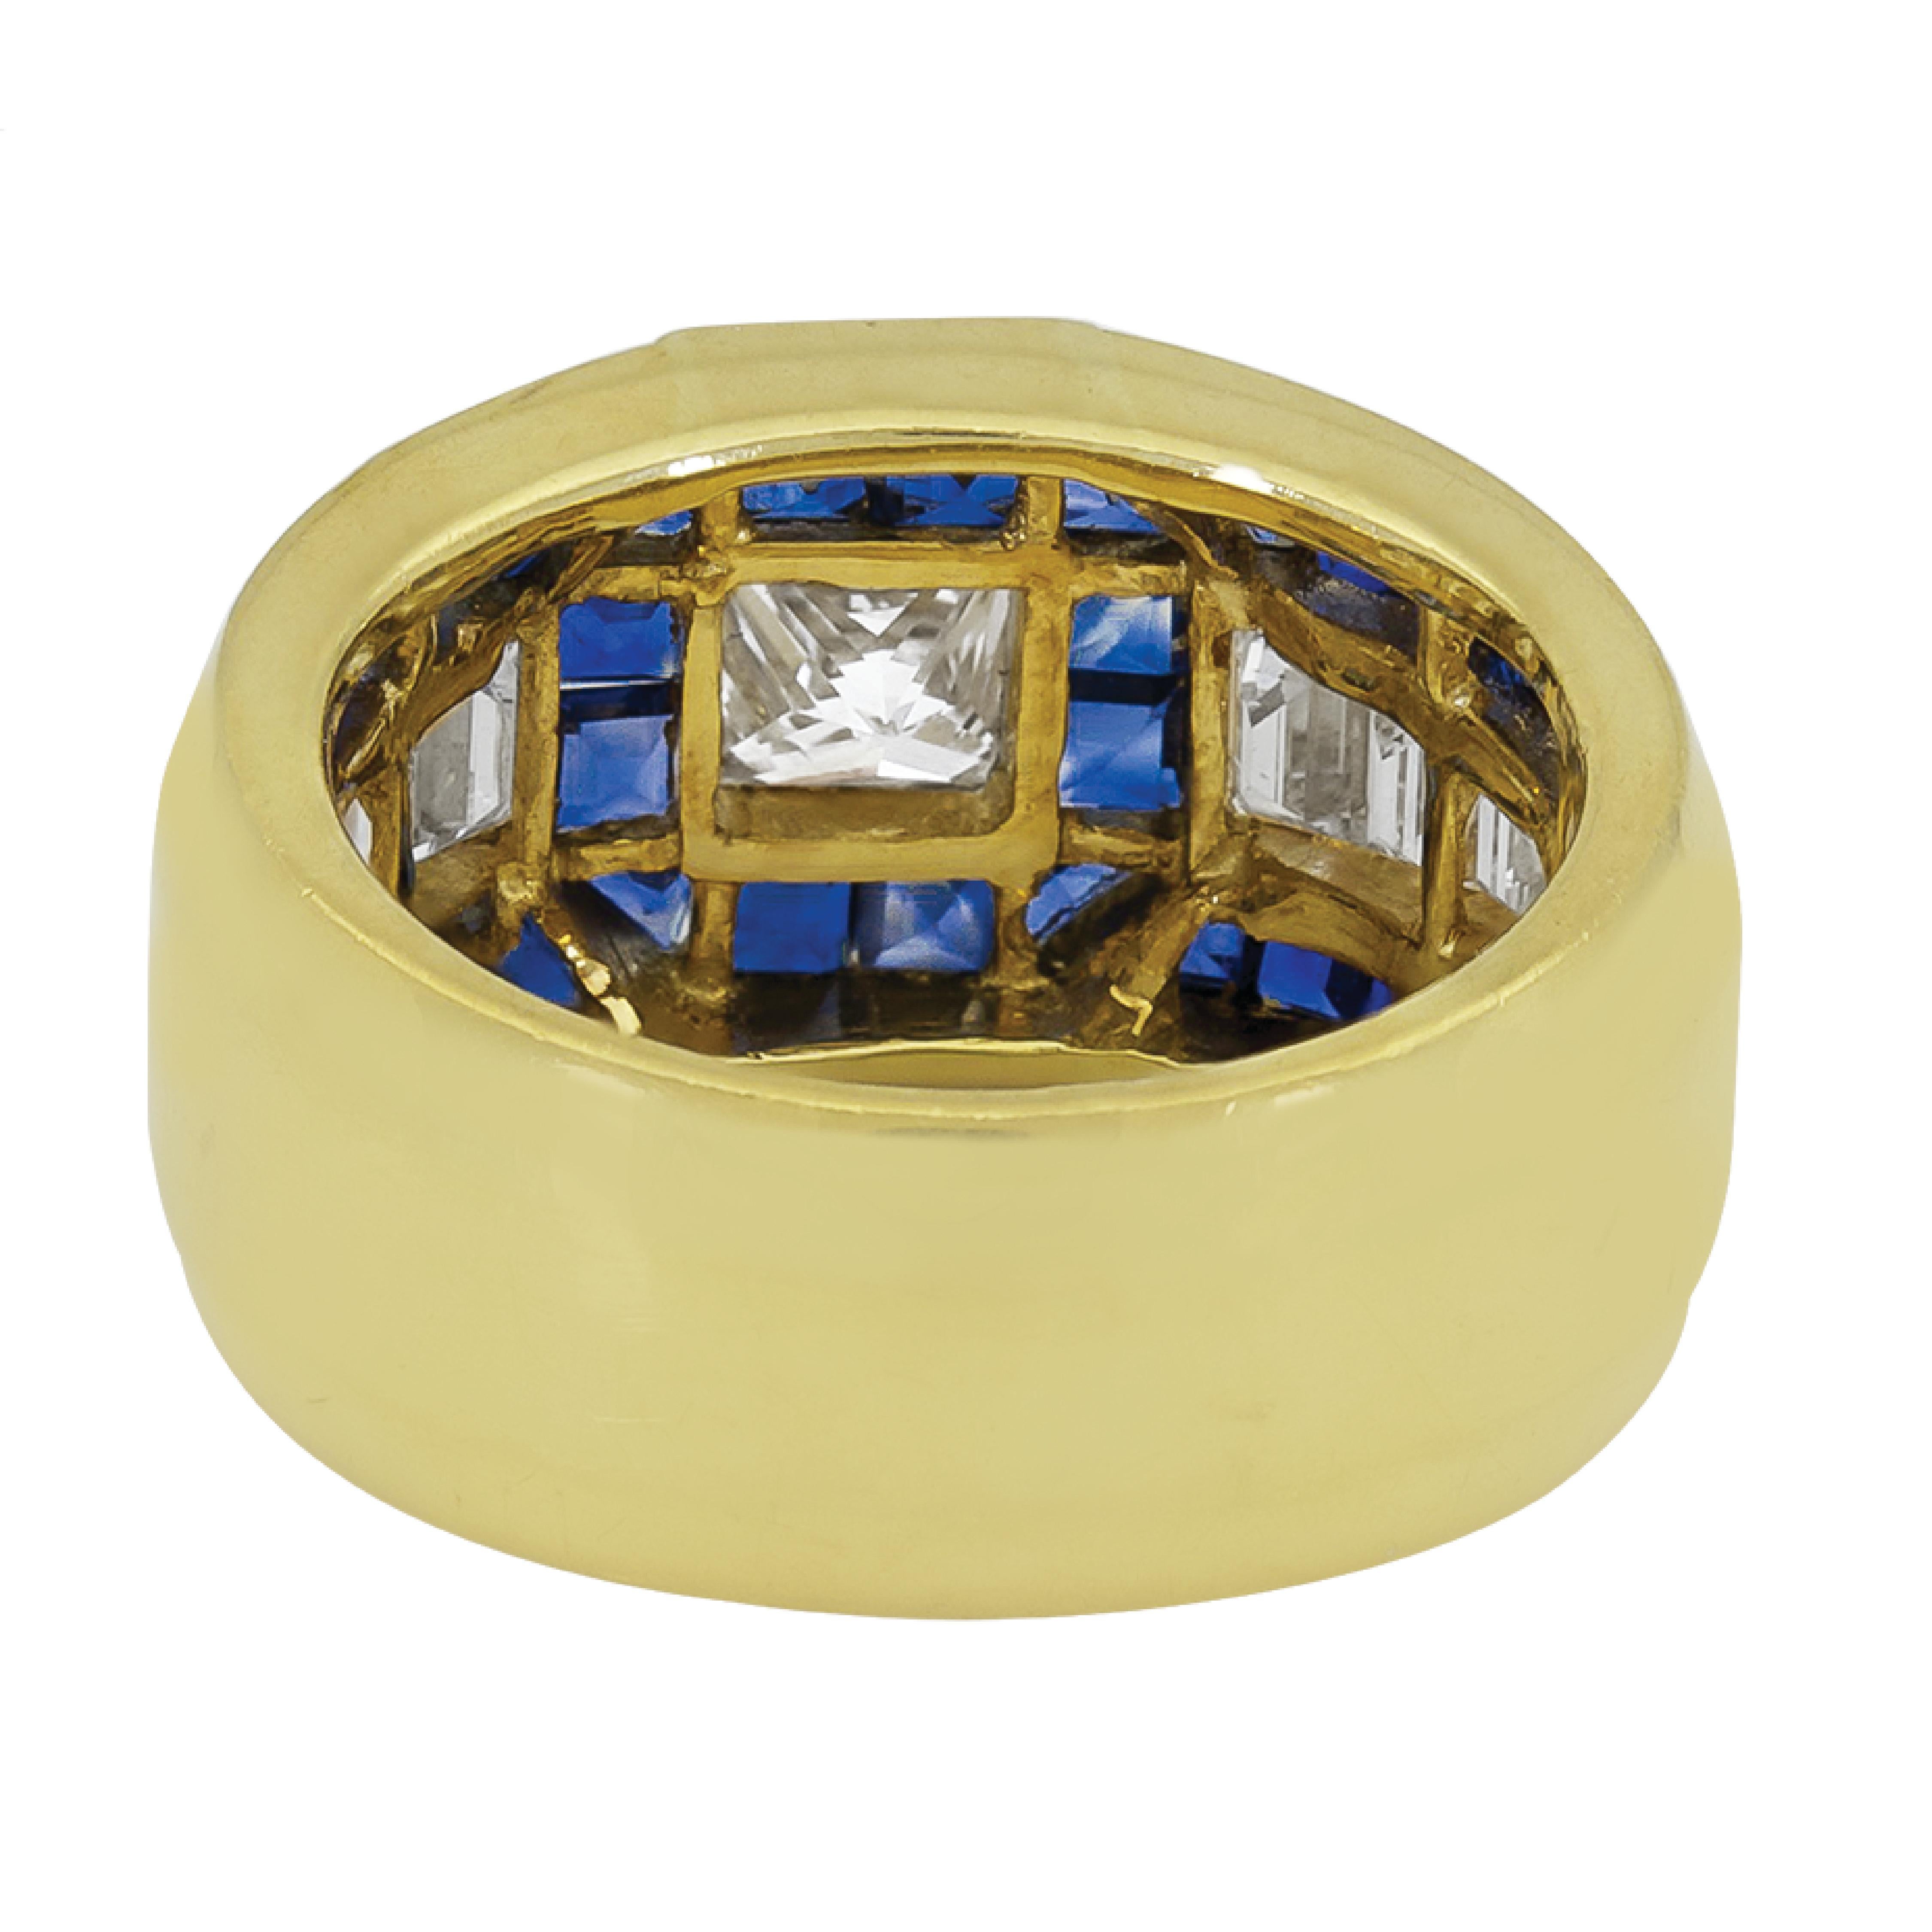 Art Deco Sophia D. 0.64 Carat Diamond Center with Blue Sapphires Dome Ring in Yellow Gold For Sale